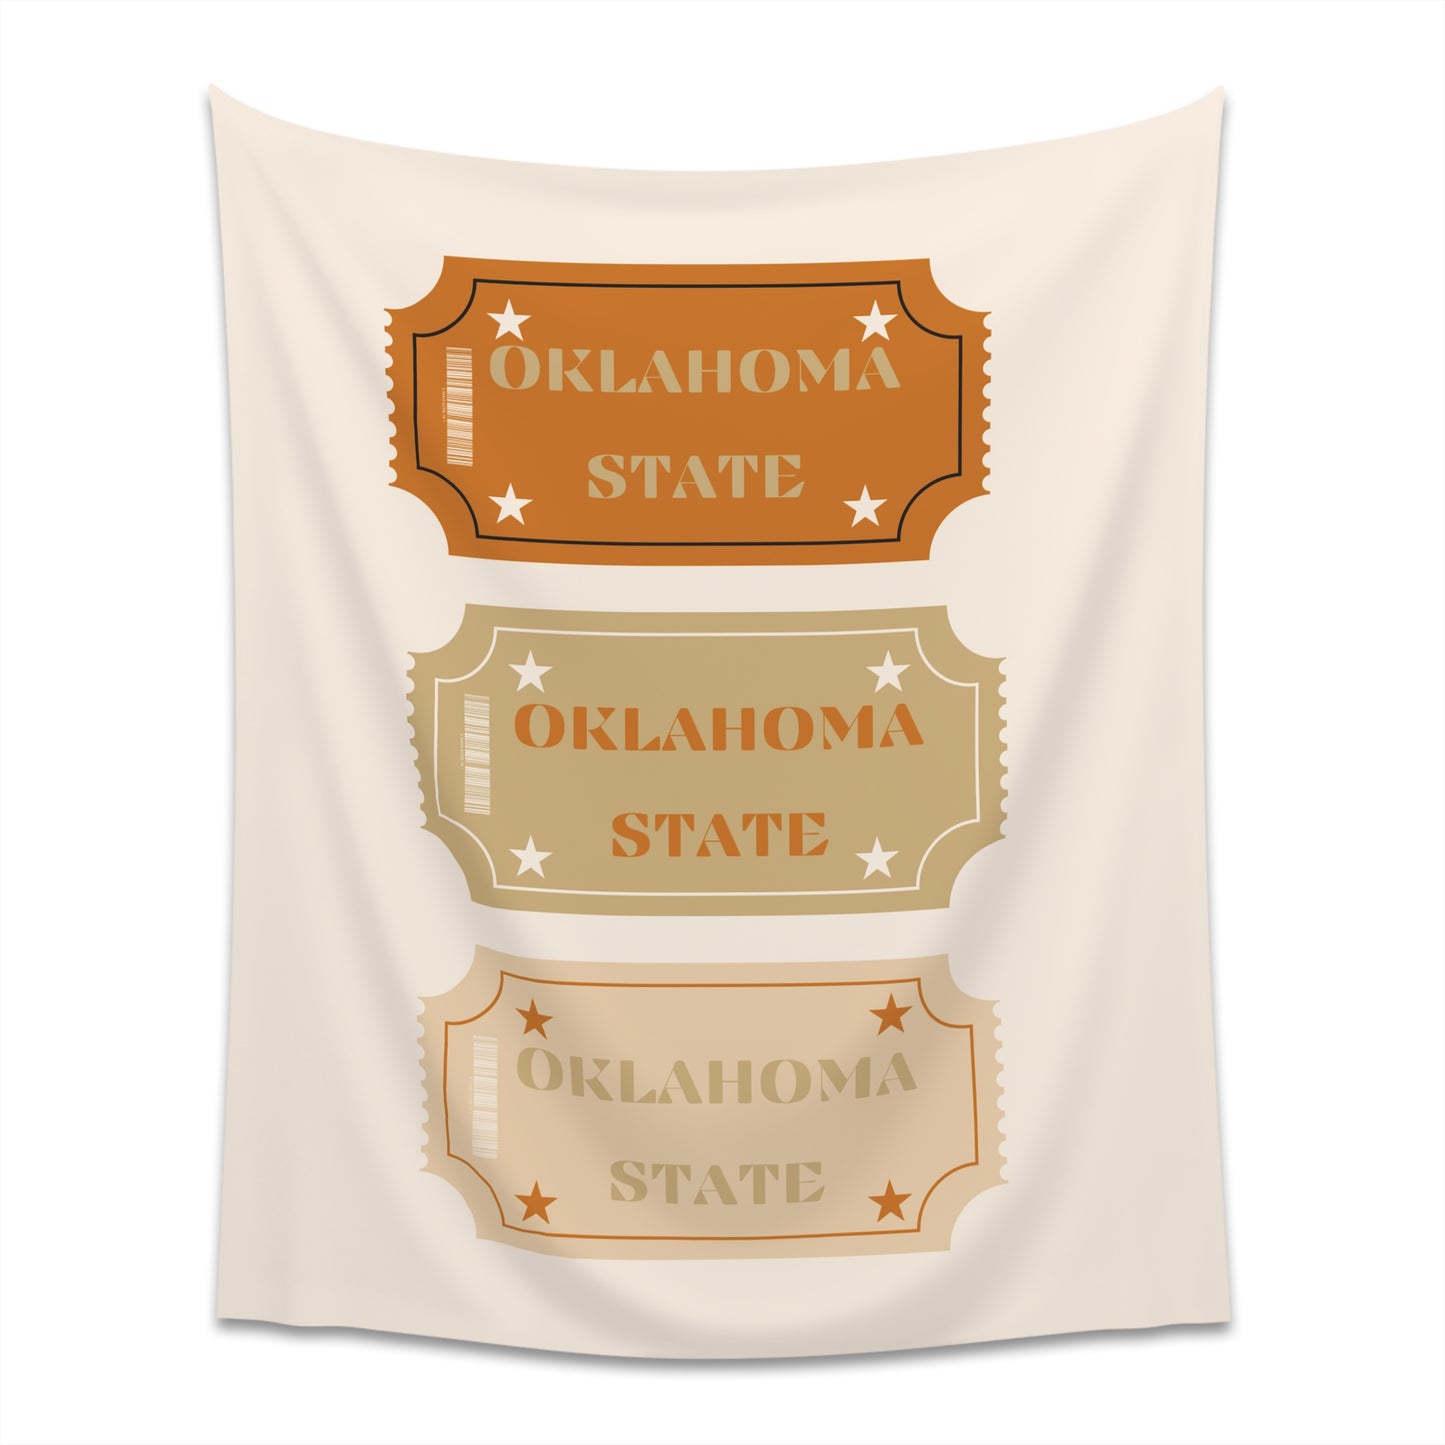 "OKLAHOMA STATE" Printed Wall Tapestry